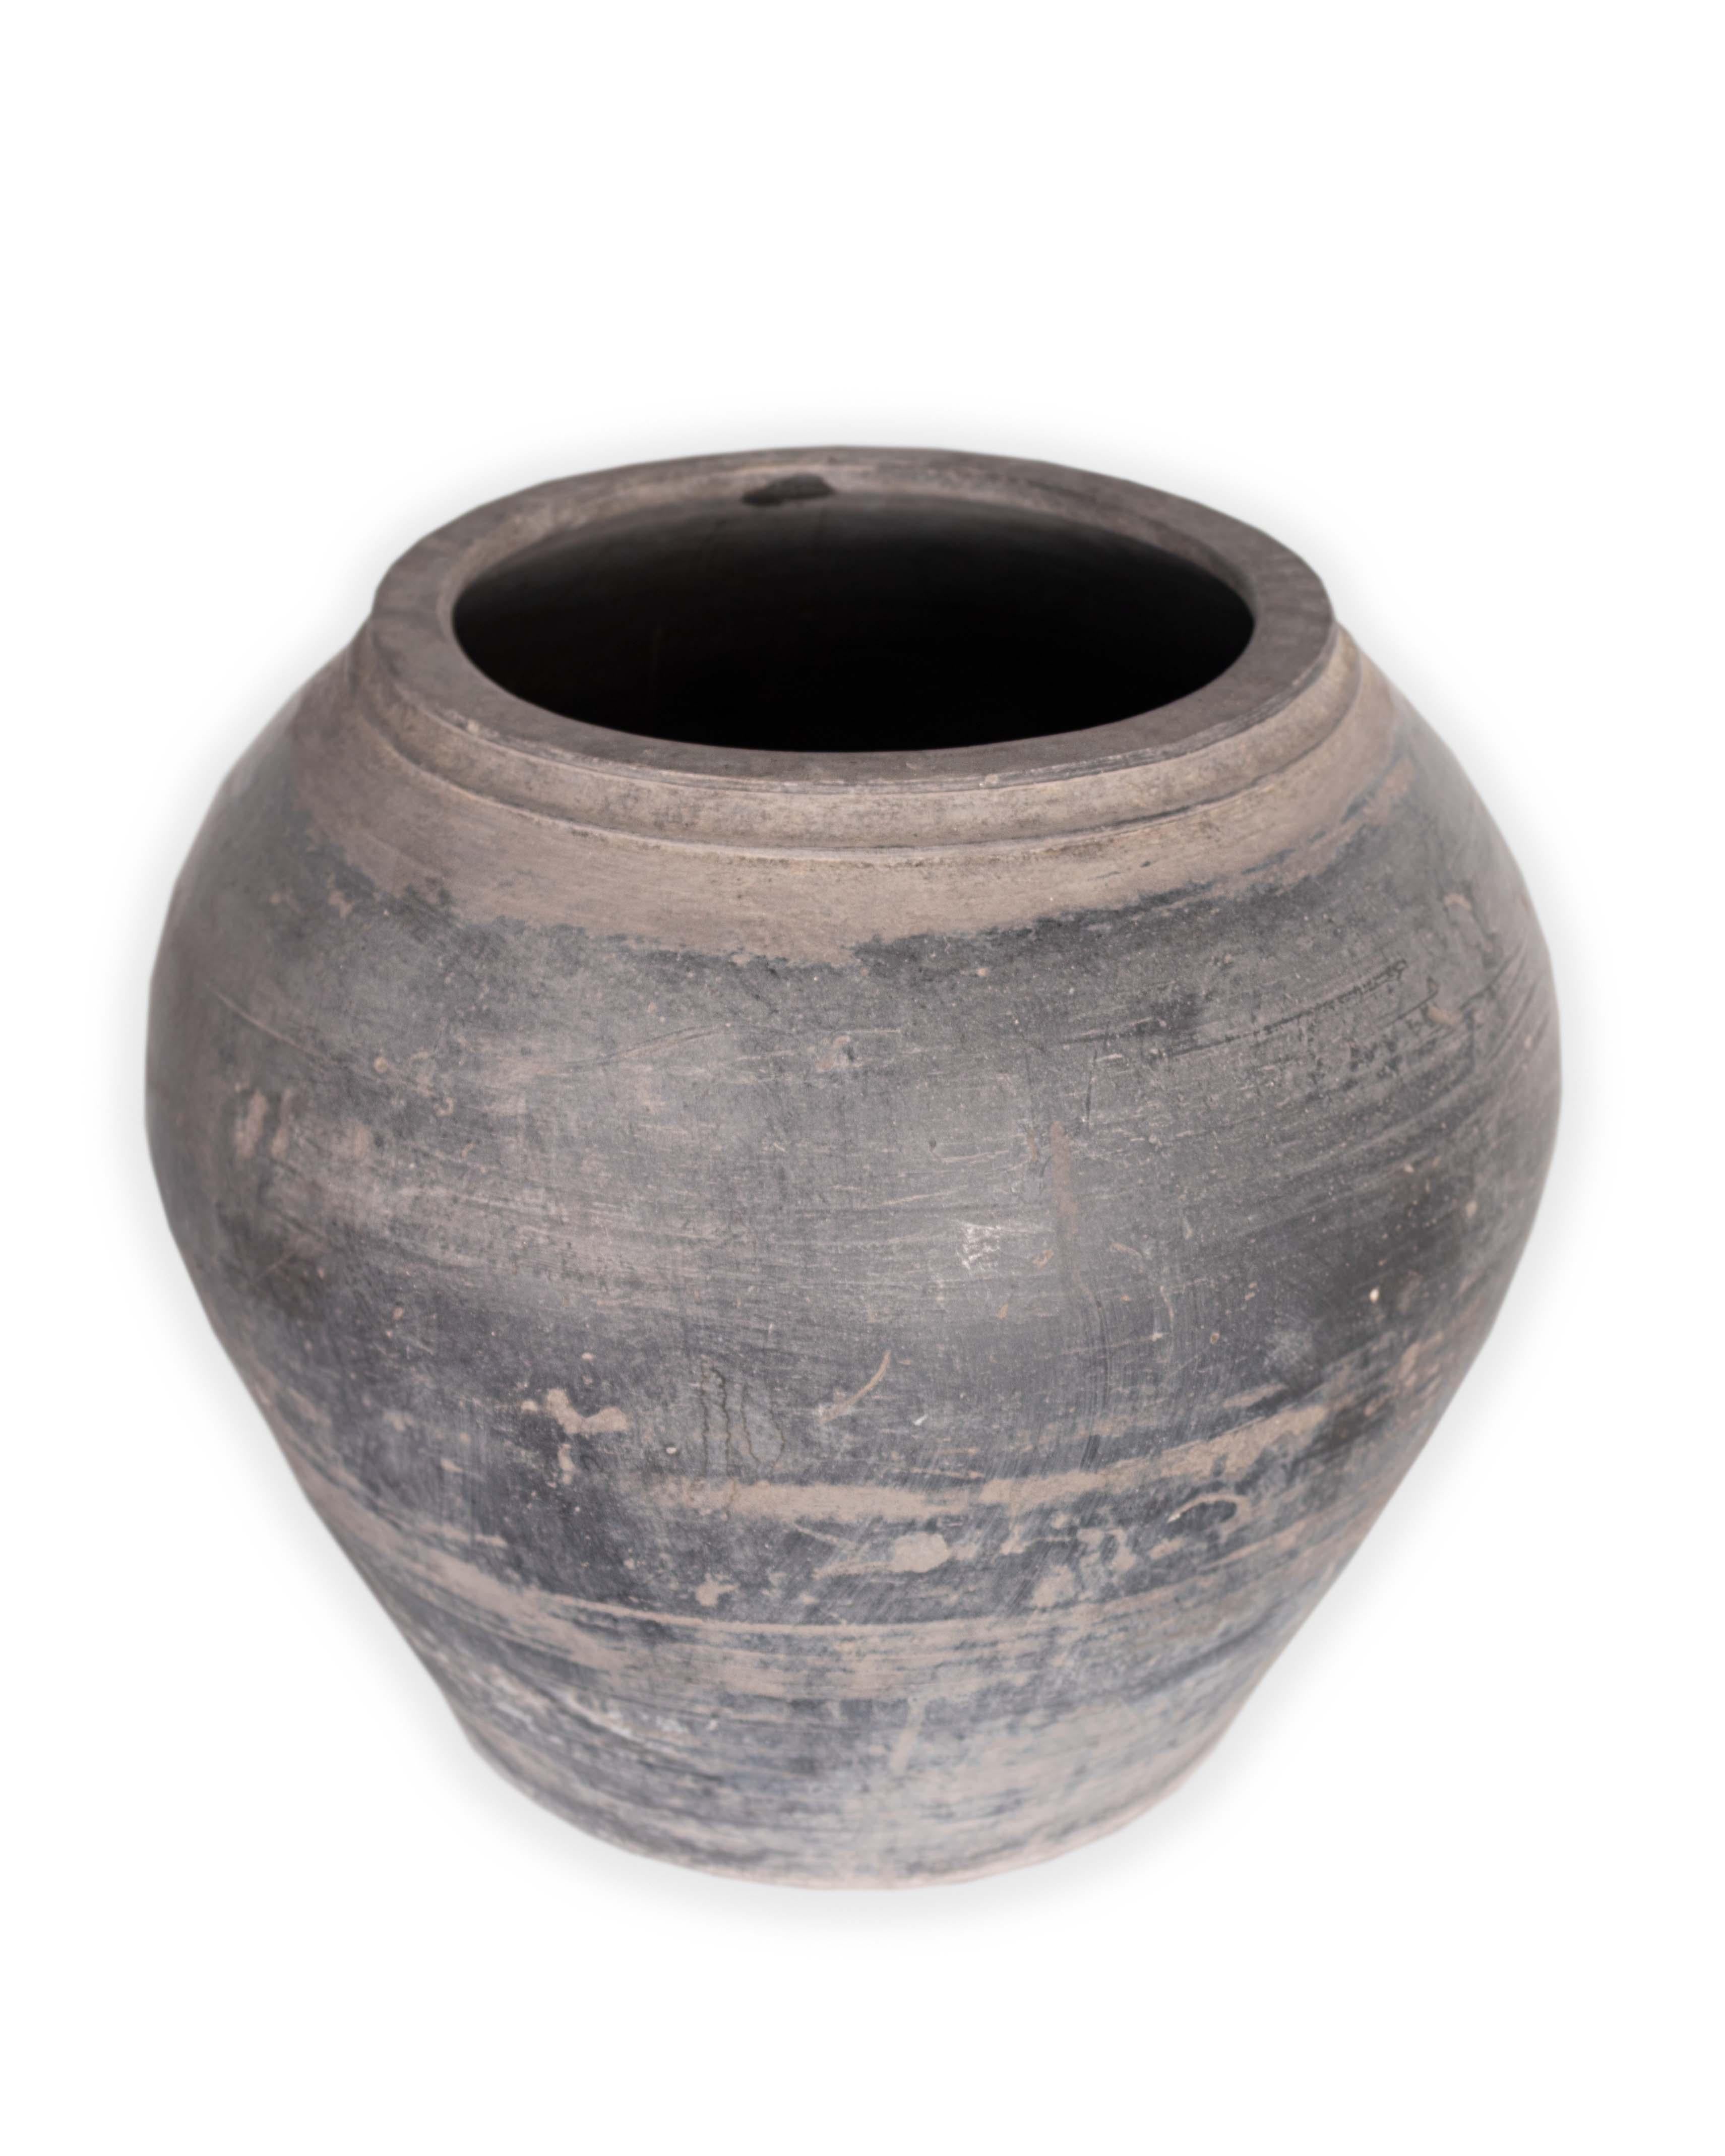 Antique grey terra cotta jar. 

This piece is a part of Brendan Bass’s one-of-a-kind collection, Le Monde. French for “The World”, the Le Monde collection is made up of rare and hard to find pieces curated by Brendan from estate sales, brocantes,